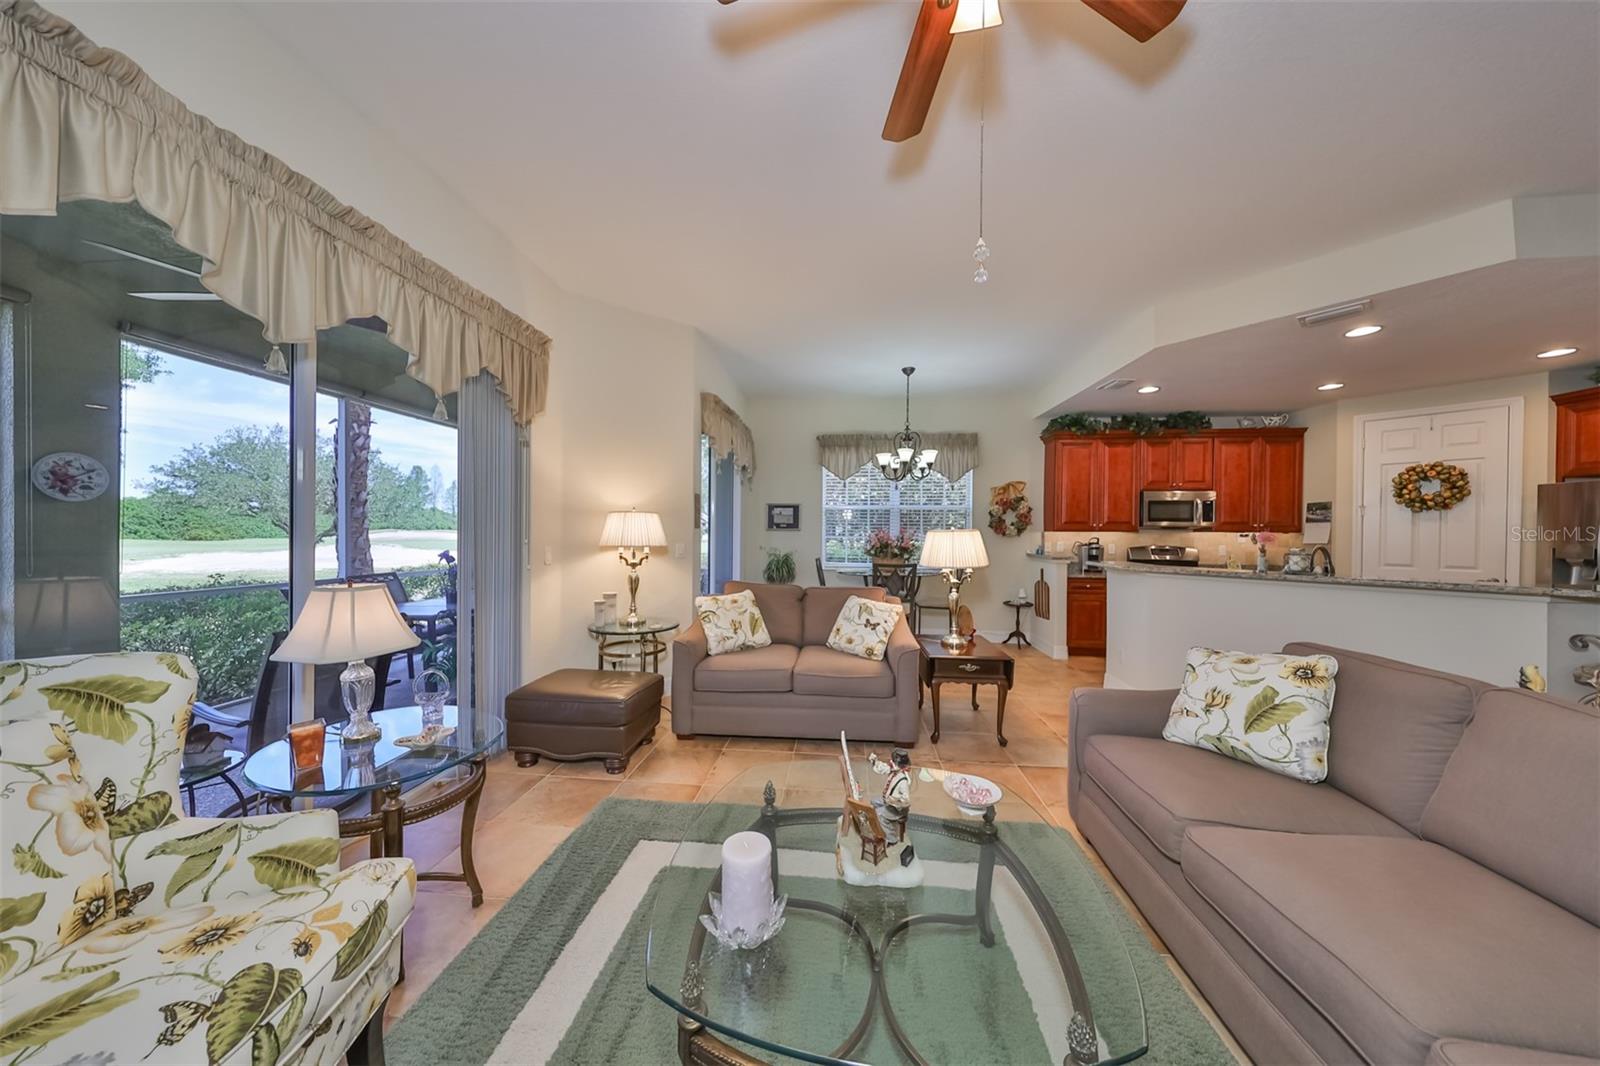 The large triple sliding glass doors and windows allow Florida sunshine to fill the home.  Relax and enjoy the animation from the Golf Course at Renaissance right from the comfort of your own couch.